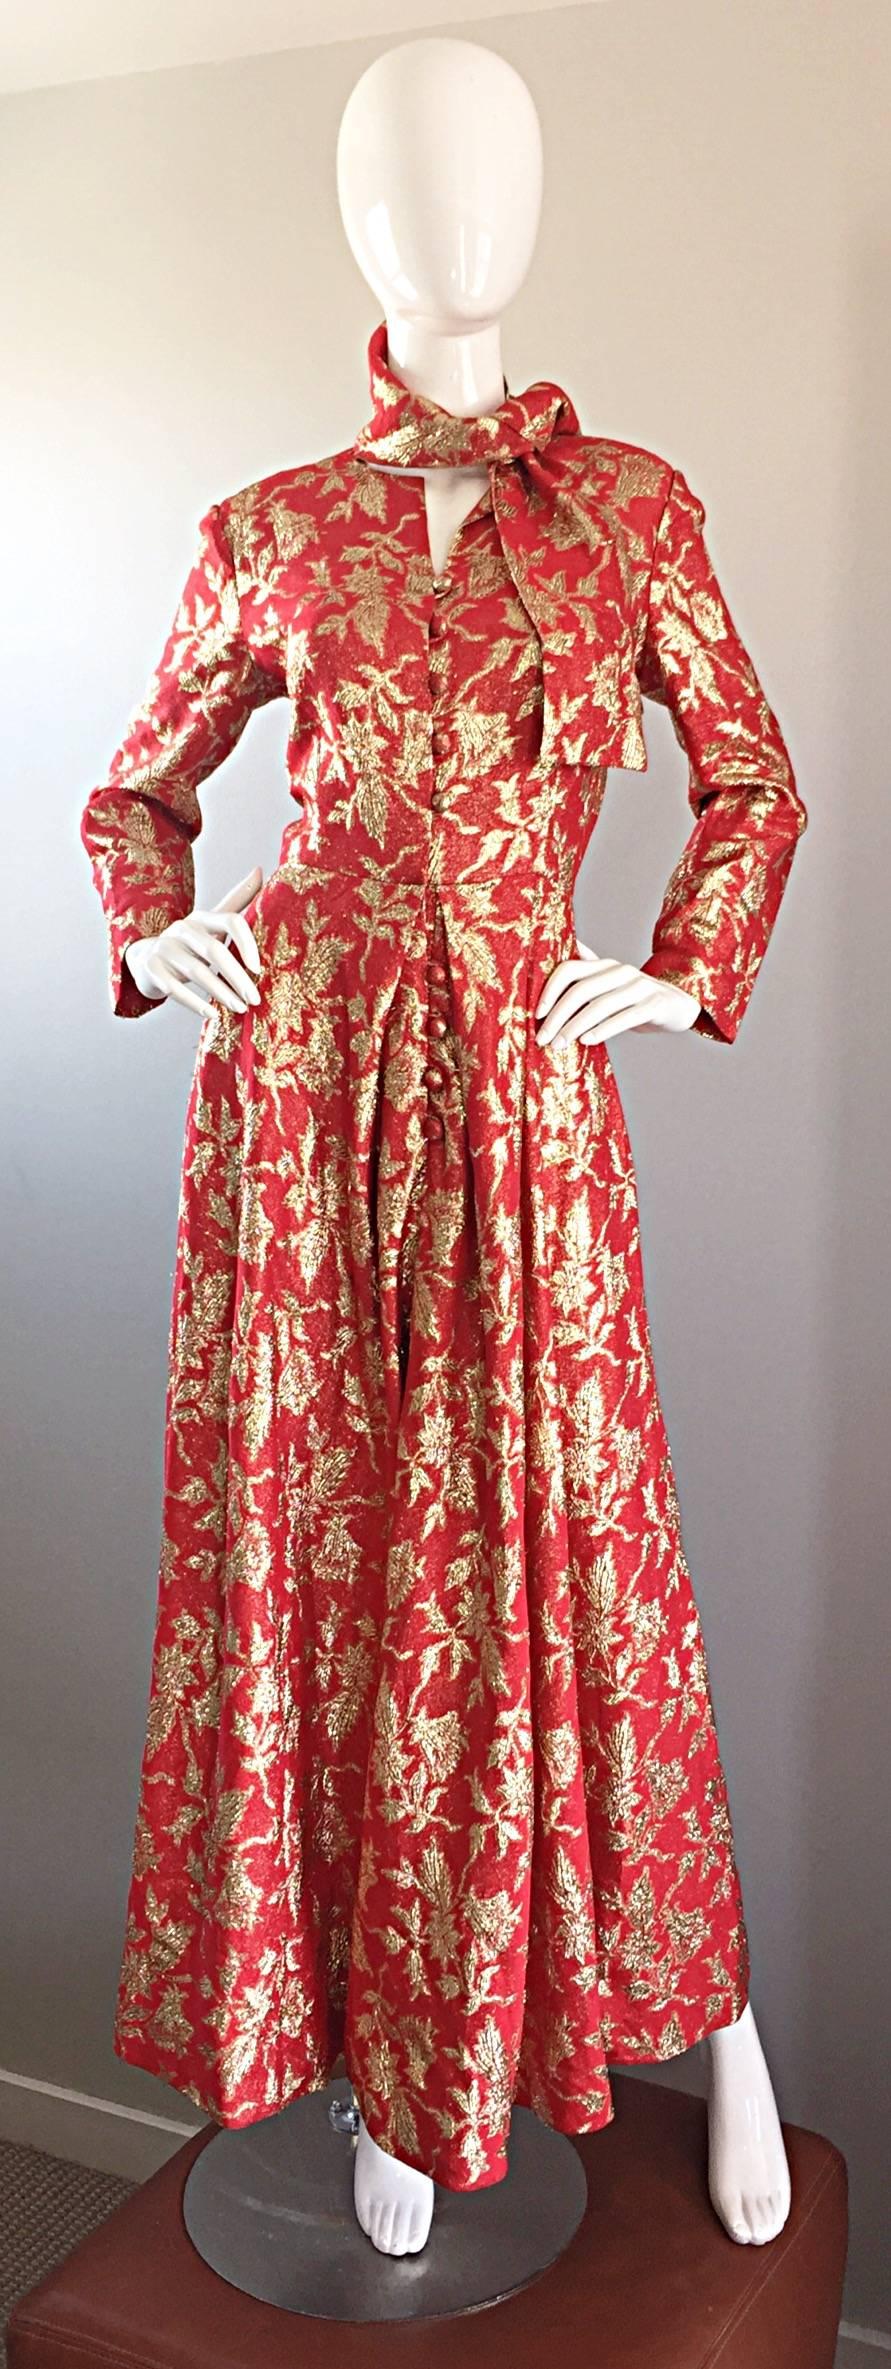 Sensational 1970s FERDINANDO SARMI red and gold metallic silk gown! Insanely well made couture quality, with quite a bit of hand sewn finishings. Attached matching scarf that screams Hollywood! Fully lined, with functional buttons up the bodice.